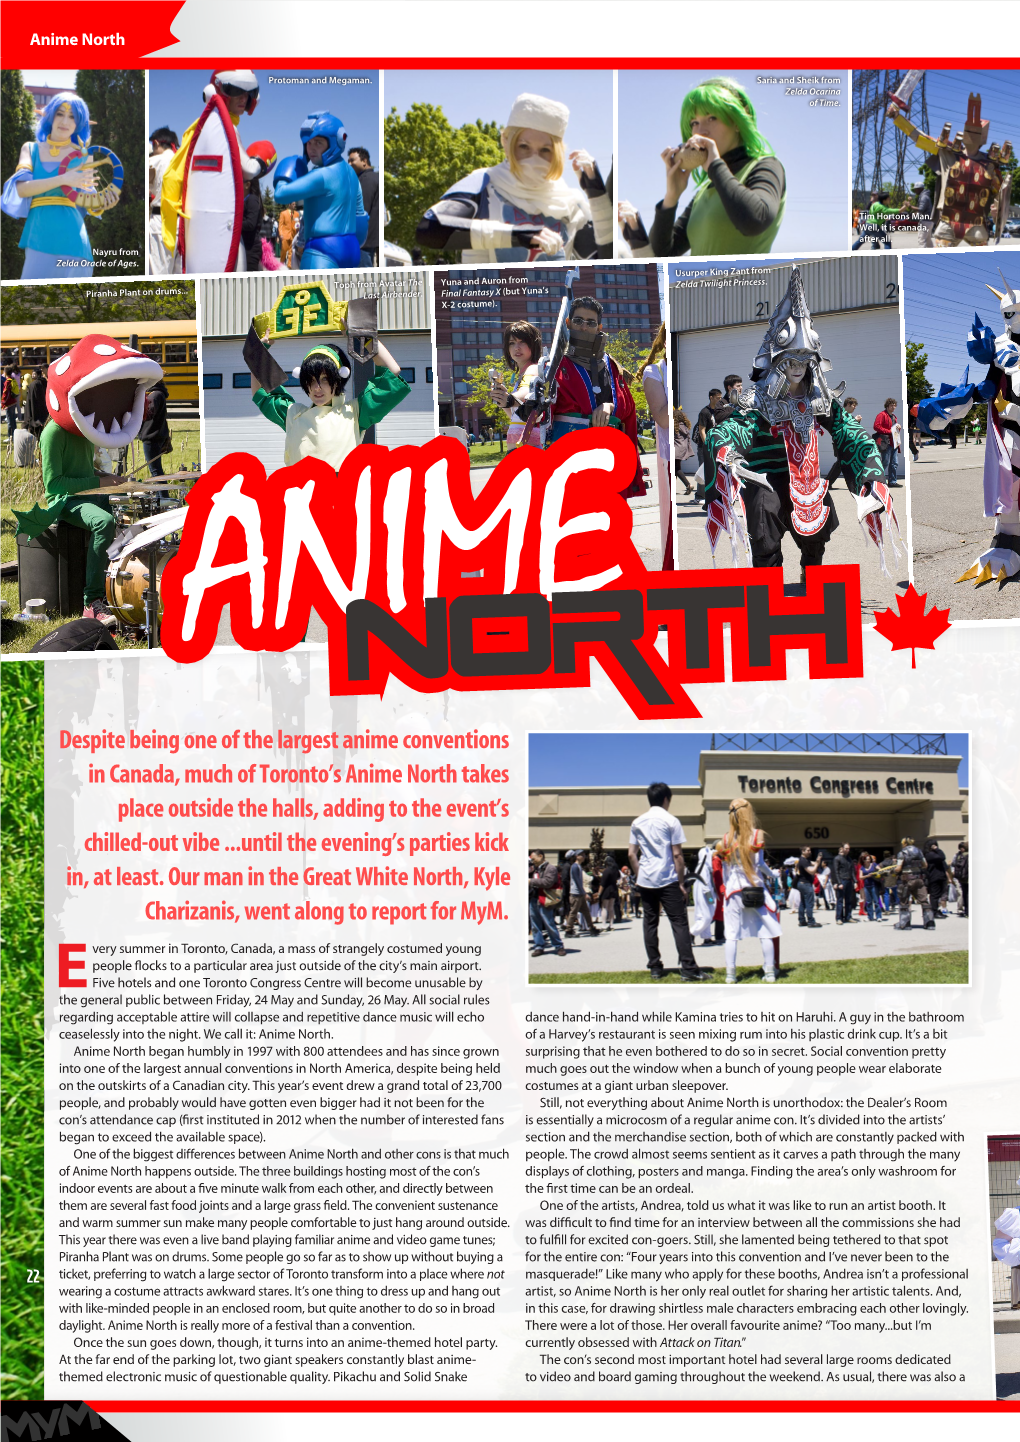 Despite Being One of the Largest Anime Conventions in Canada